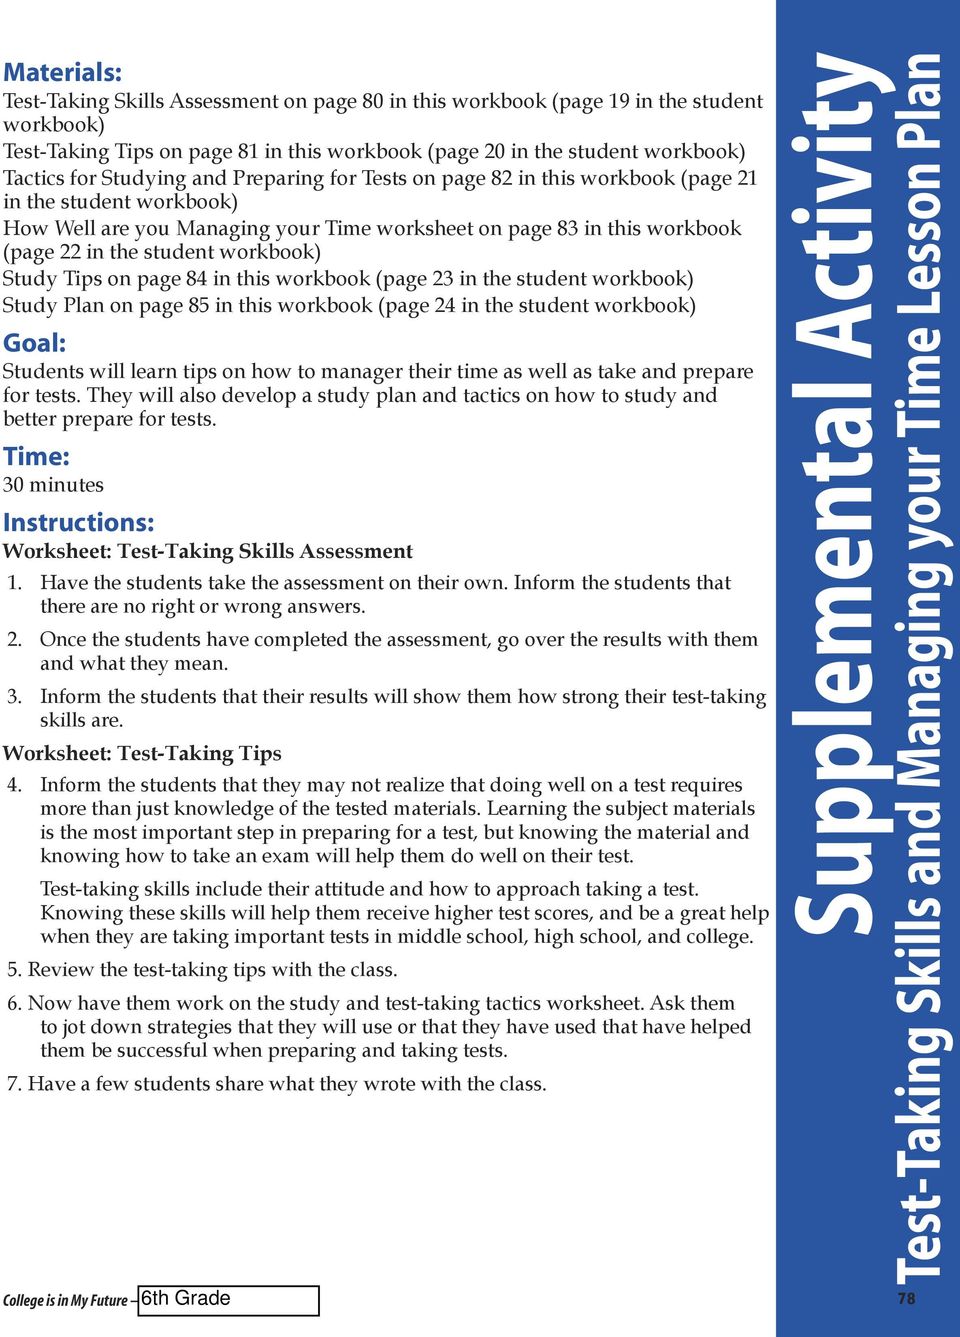 workbook) Study Tips on page 84 in this workbook (page 23 in the student workbook) Study Plan on page 85 in this workbook (page 24 in the student workbook) Goal: Students will learn tips on how to